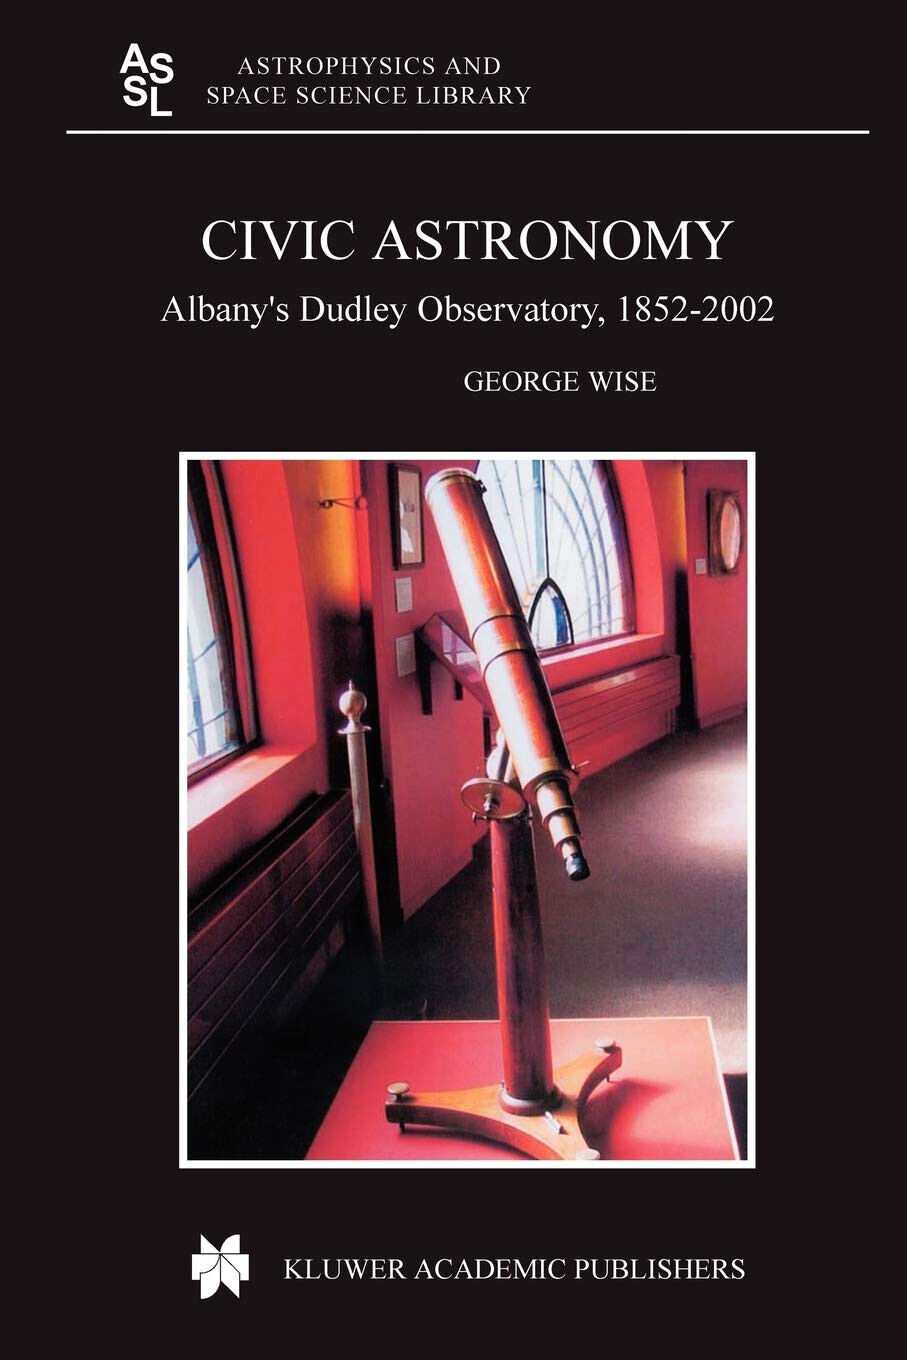 Civic Astronomy - George Wise - Springer, 2010